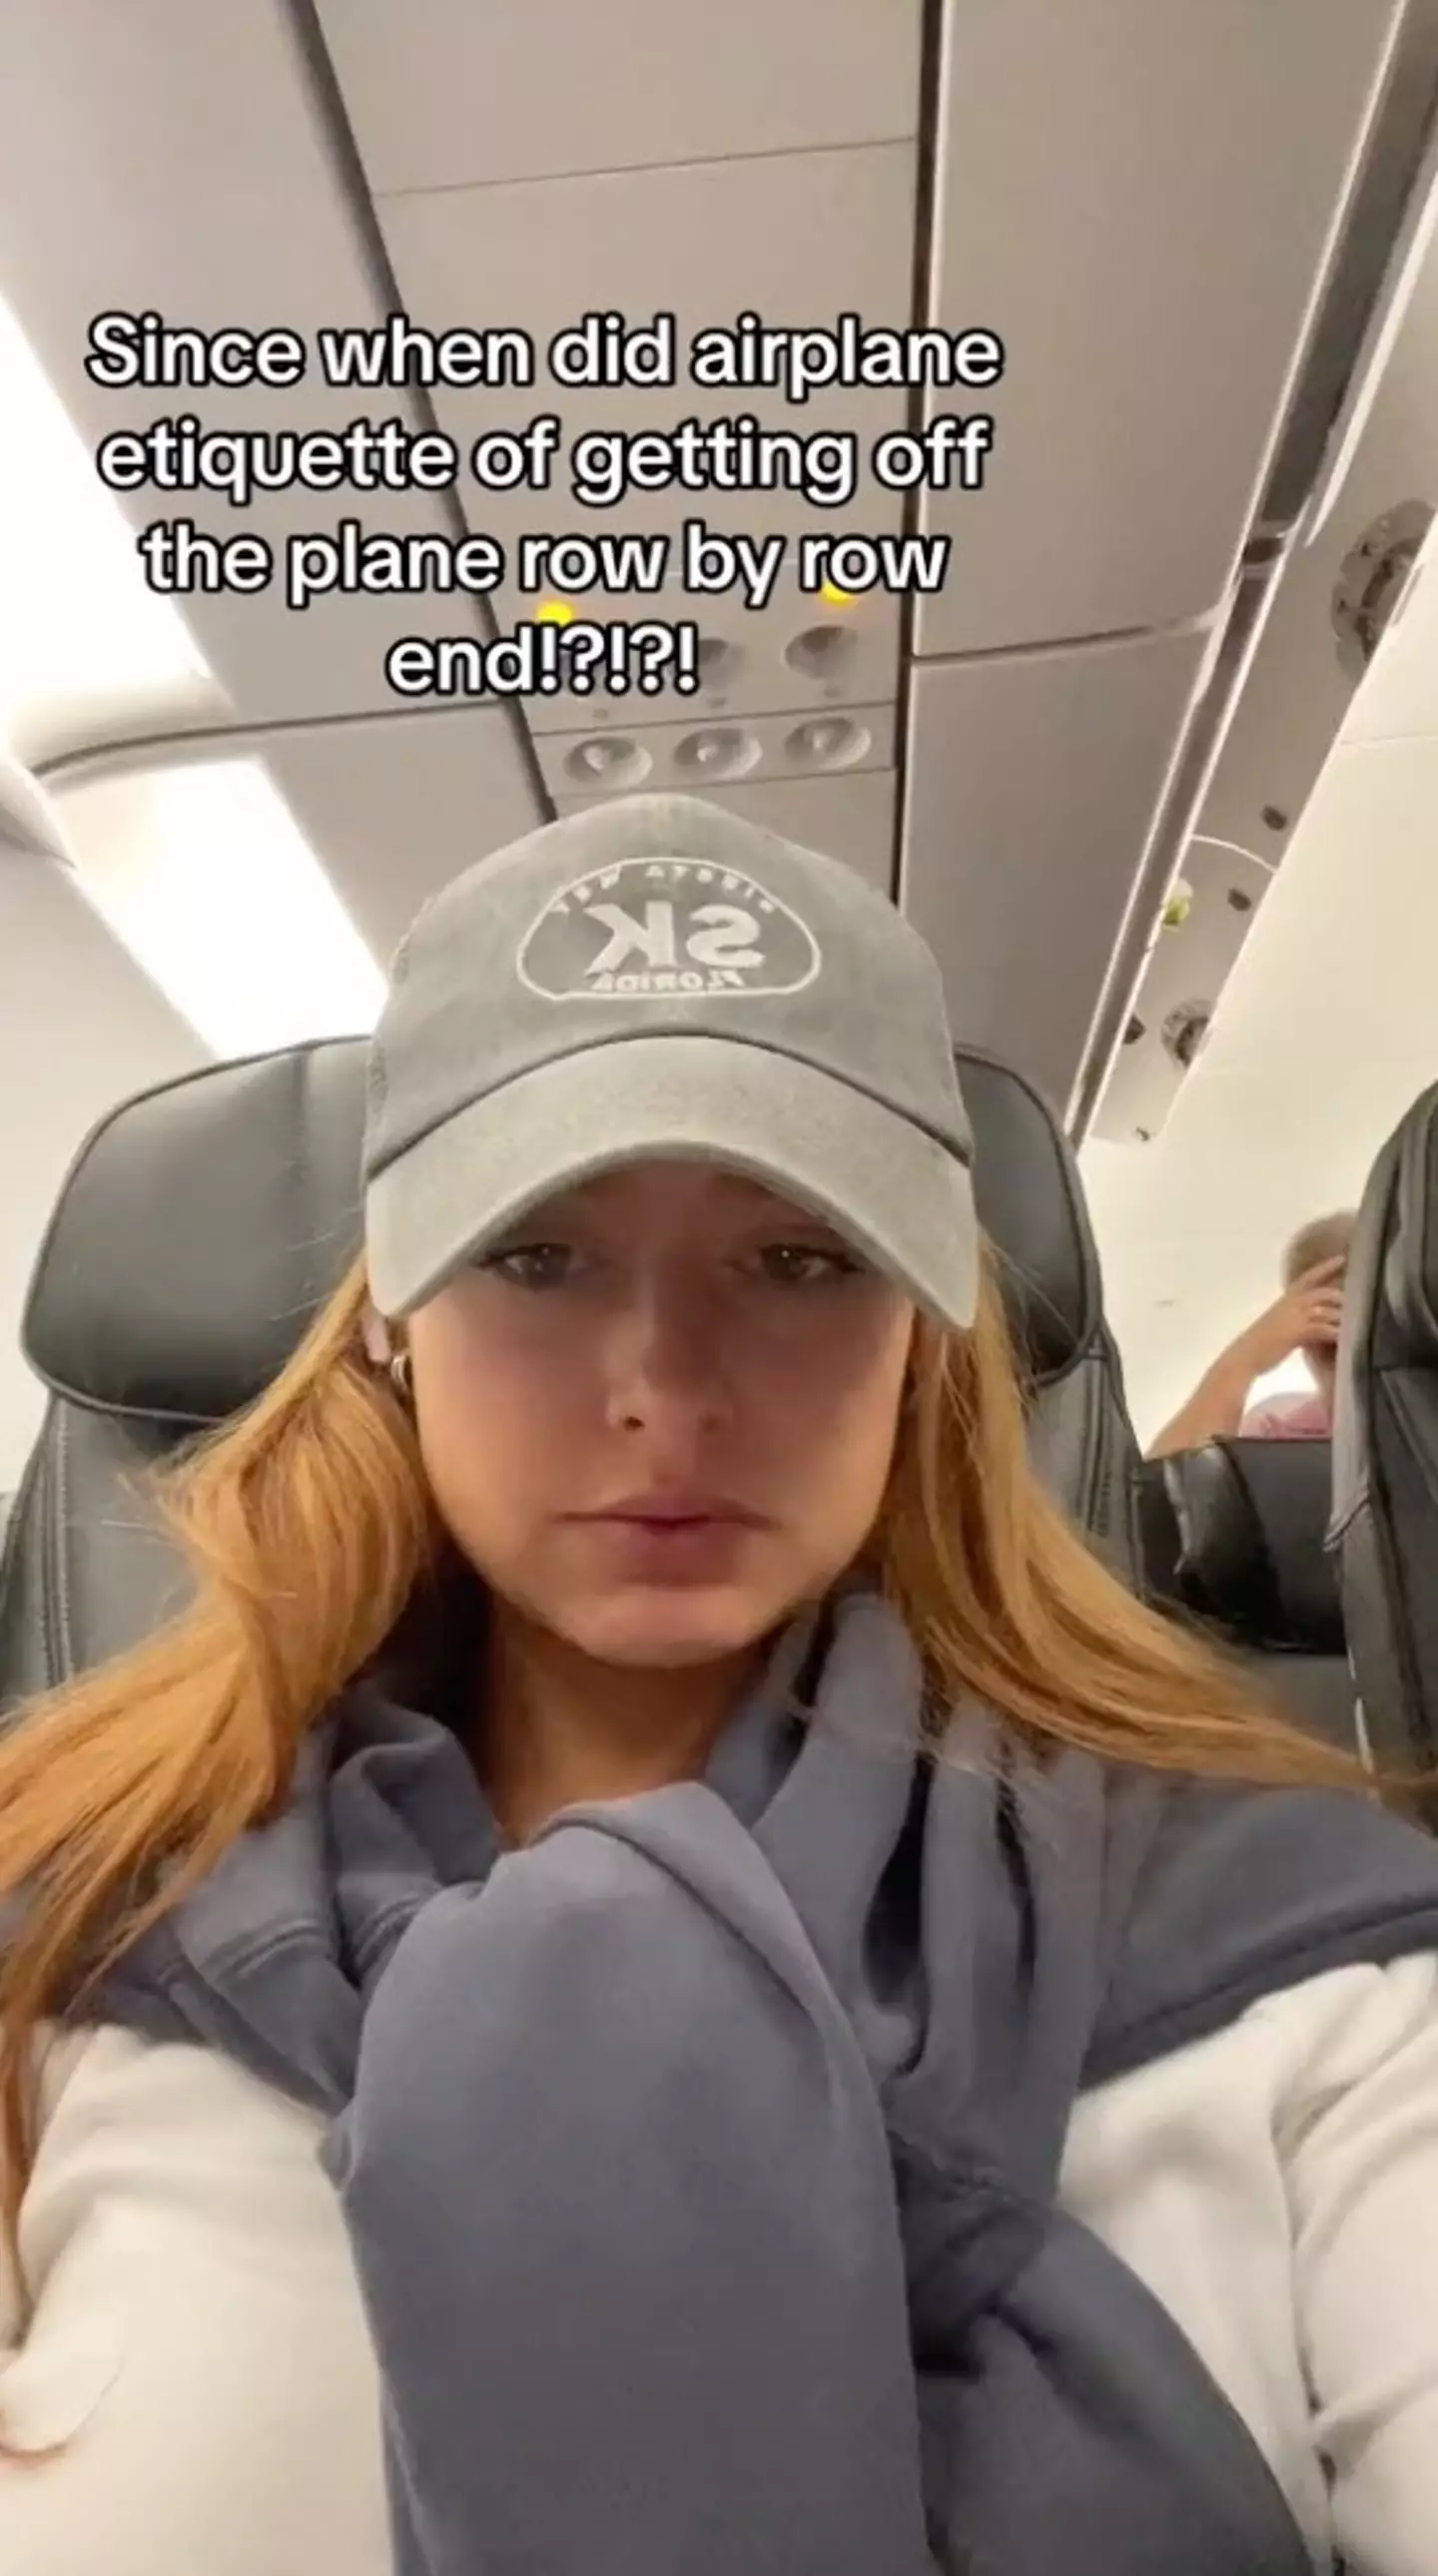 A passenger has sparked a fierce debate about ‘plane etiquette’ after questioning why people rush to exit the aircraft.